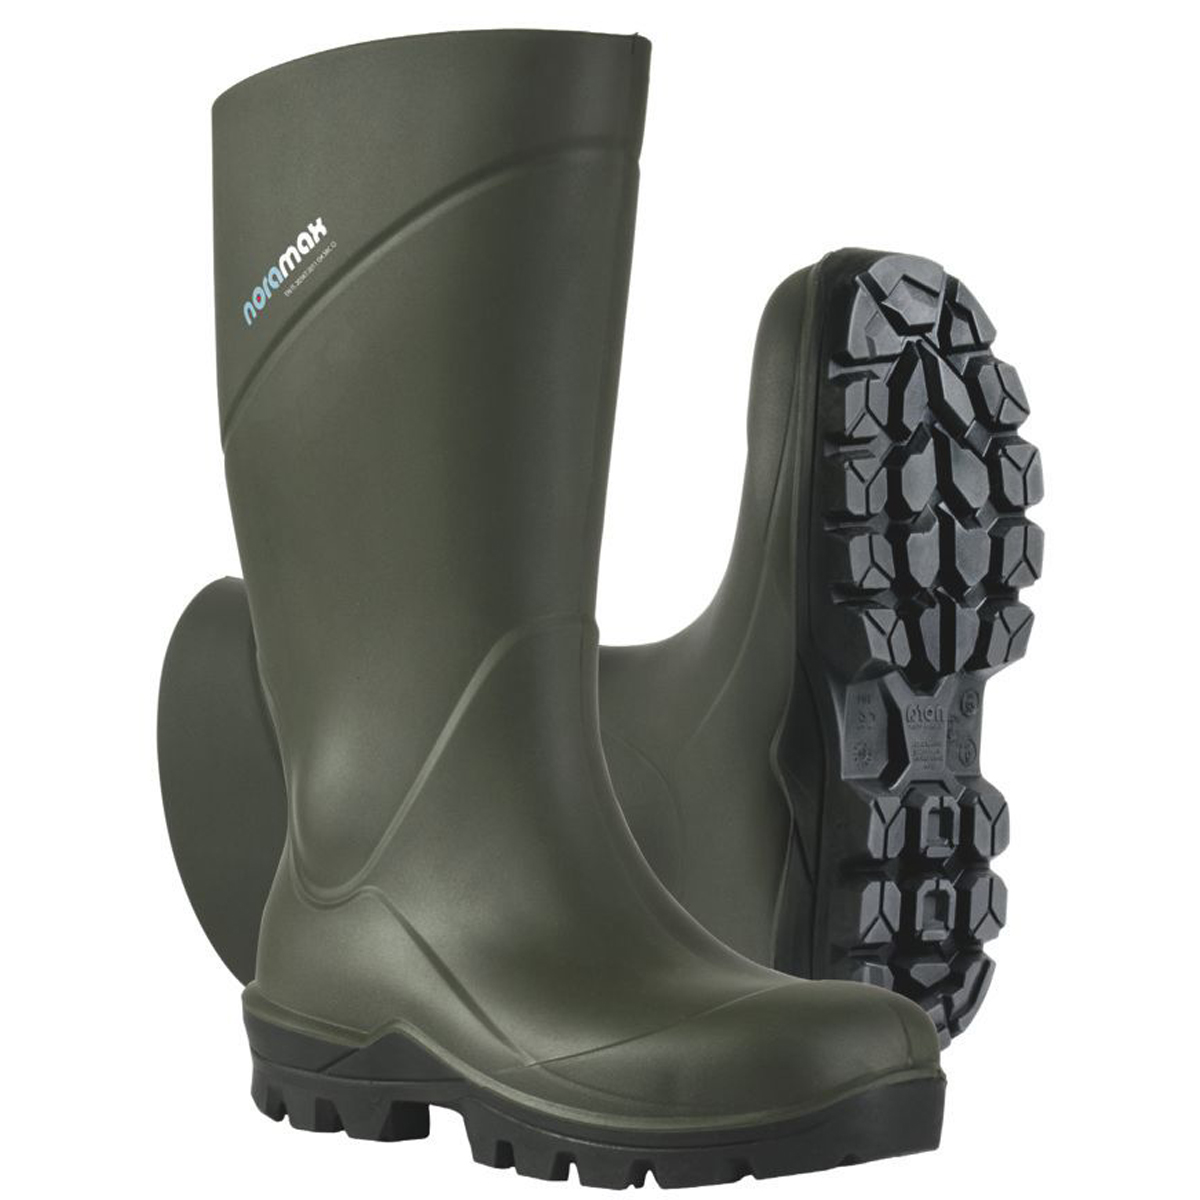 Noramax boots Non Safety 47